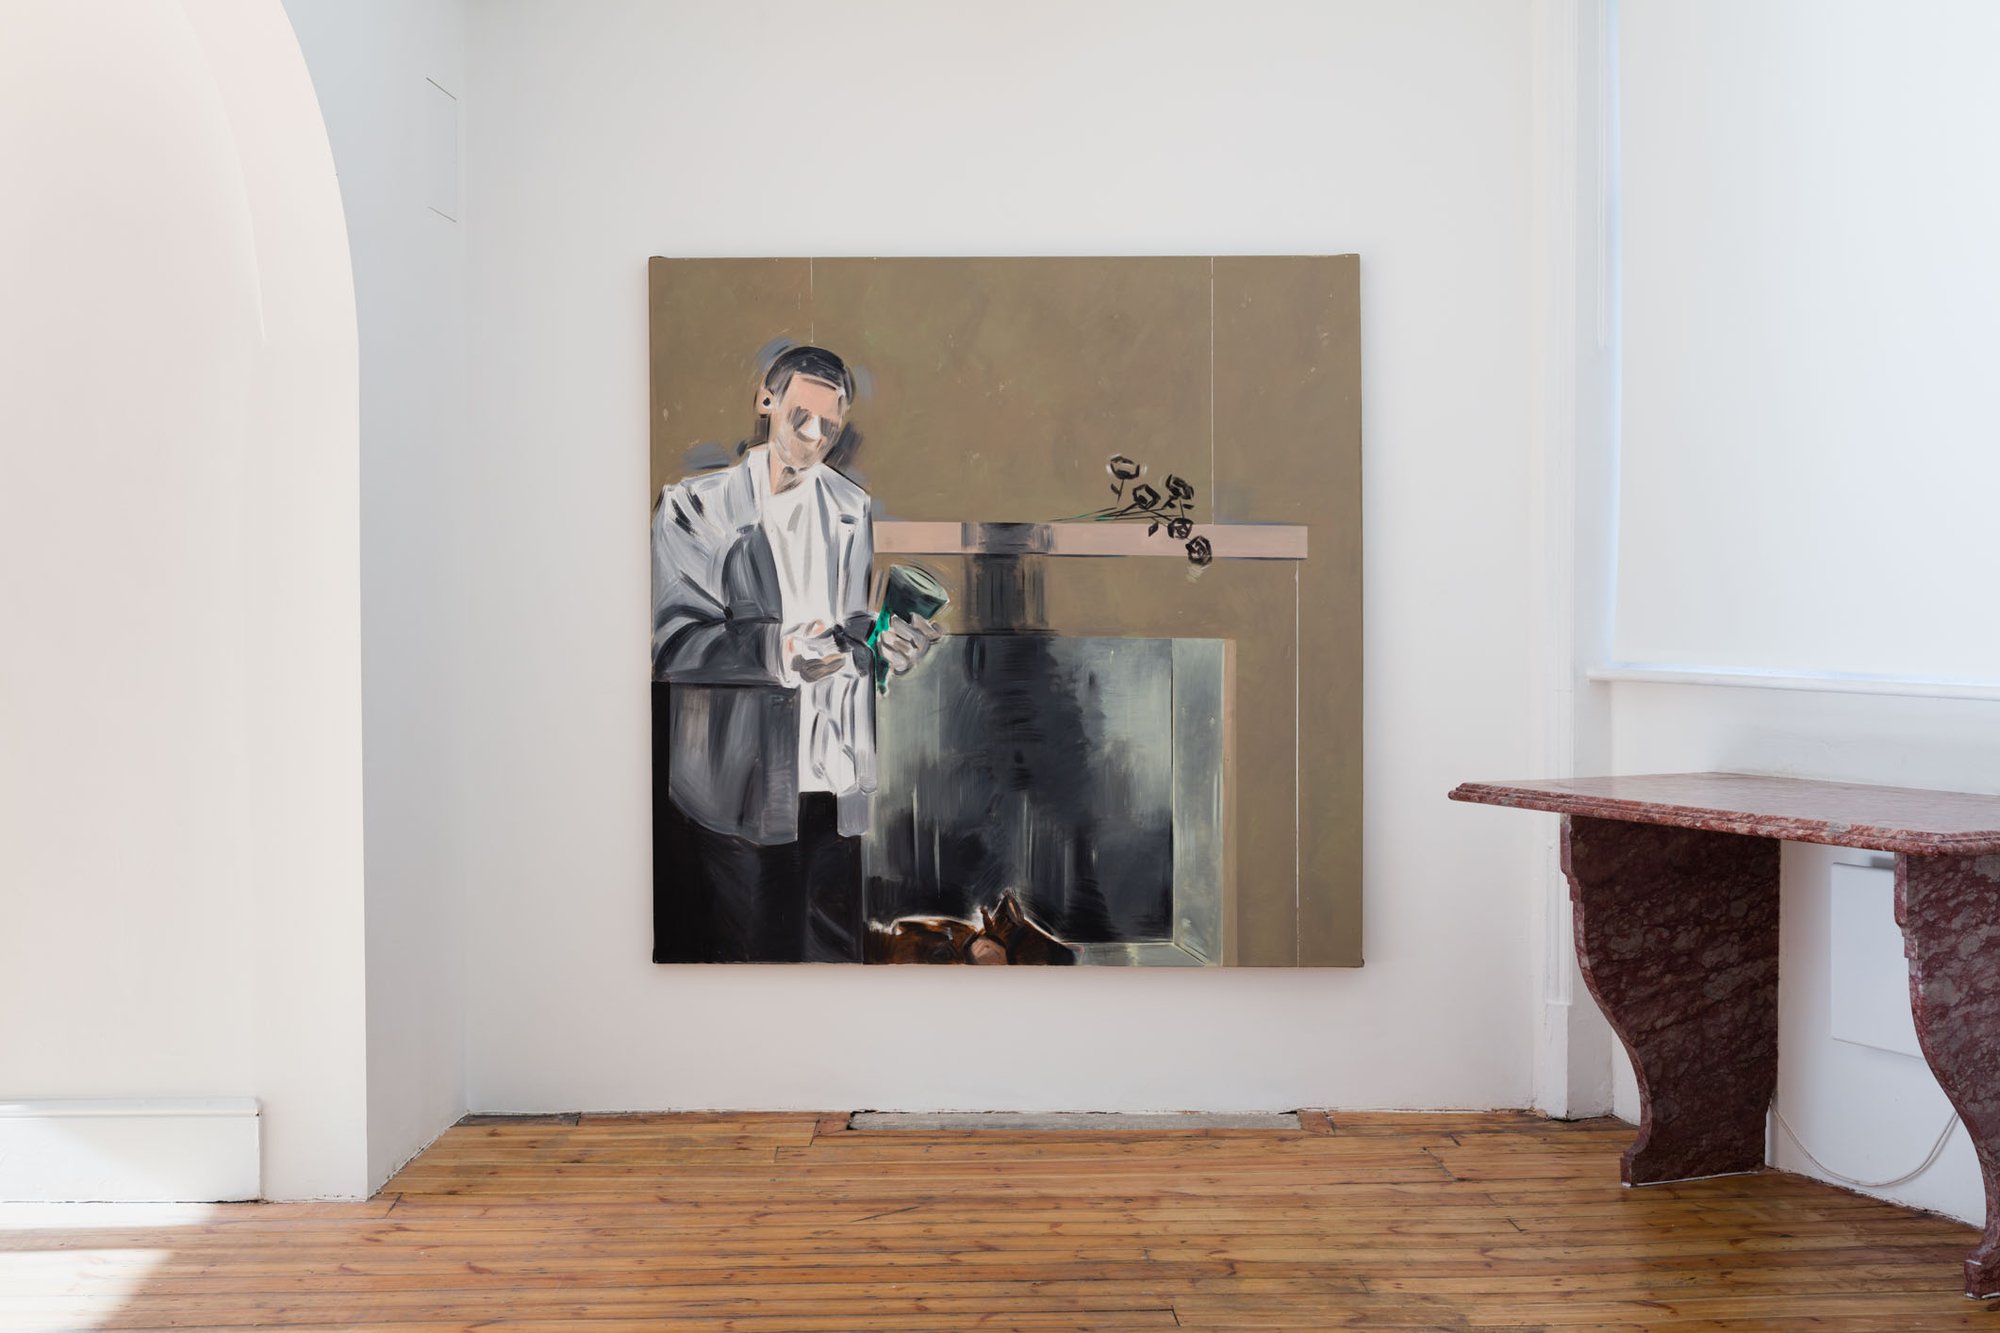 Apostolos Georgiou, Untitled, acrylic on canvas, 170 x 170 cm, 2014. Installation view, The Same Old Fucking Story, Rodeo, London, 2016